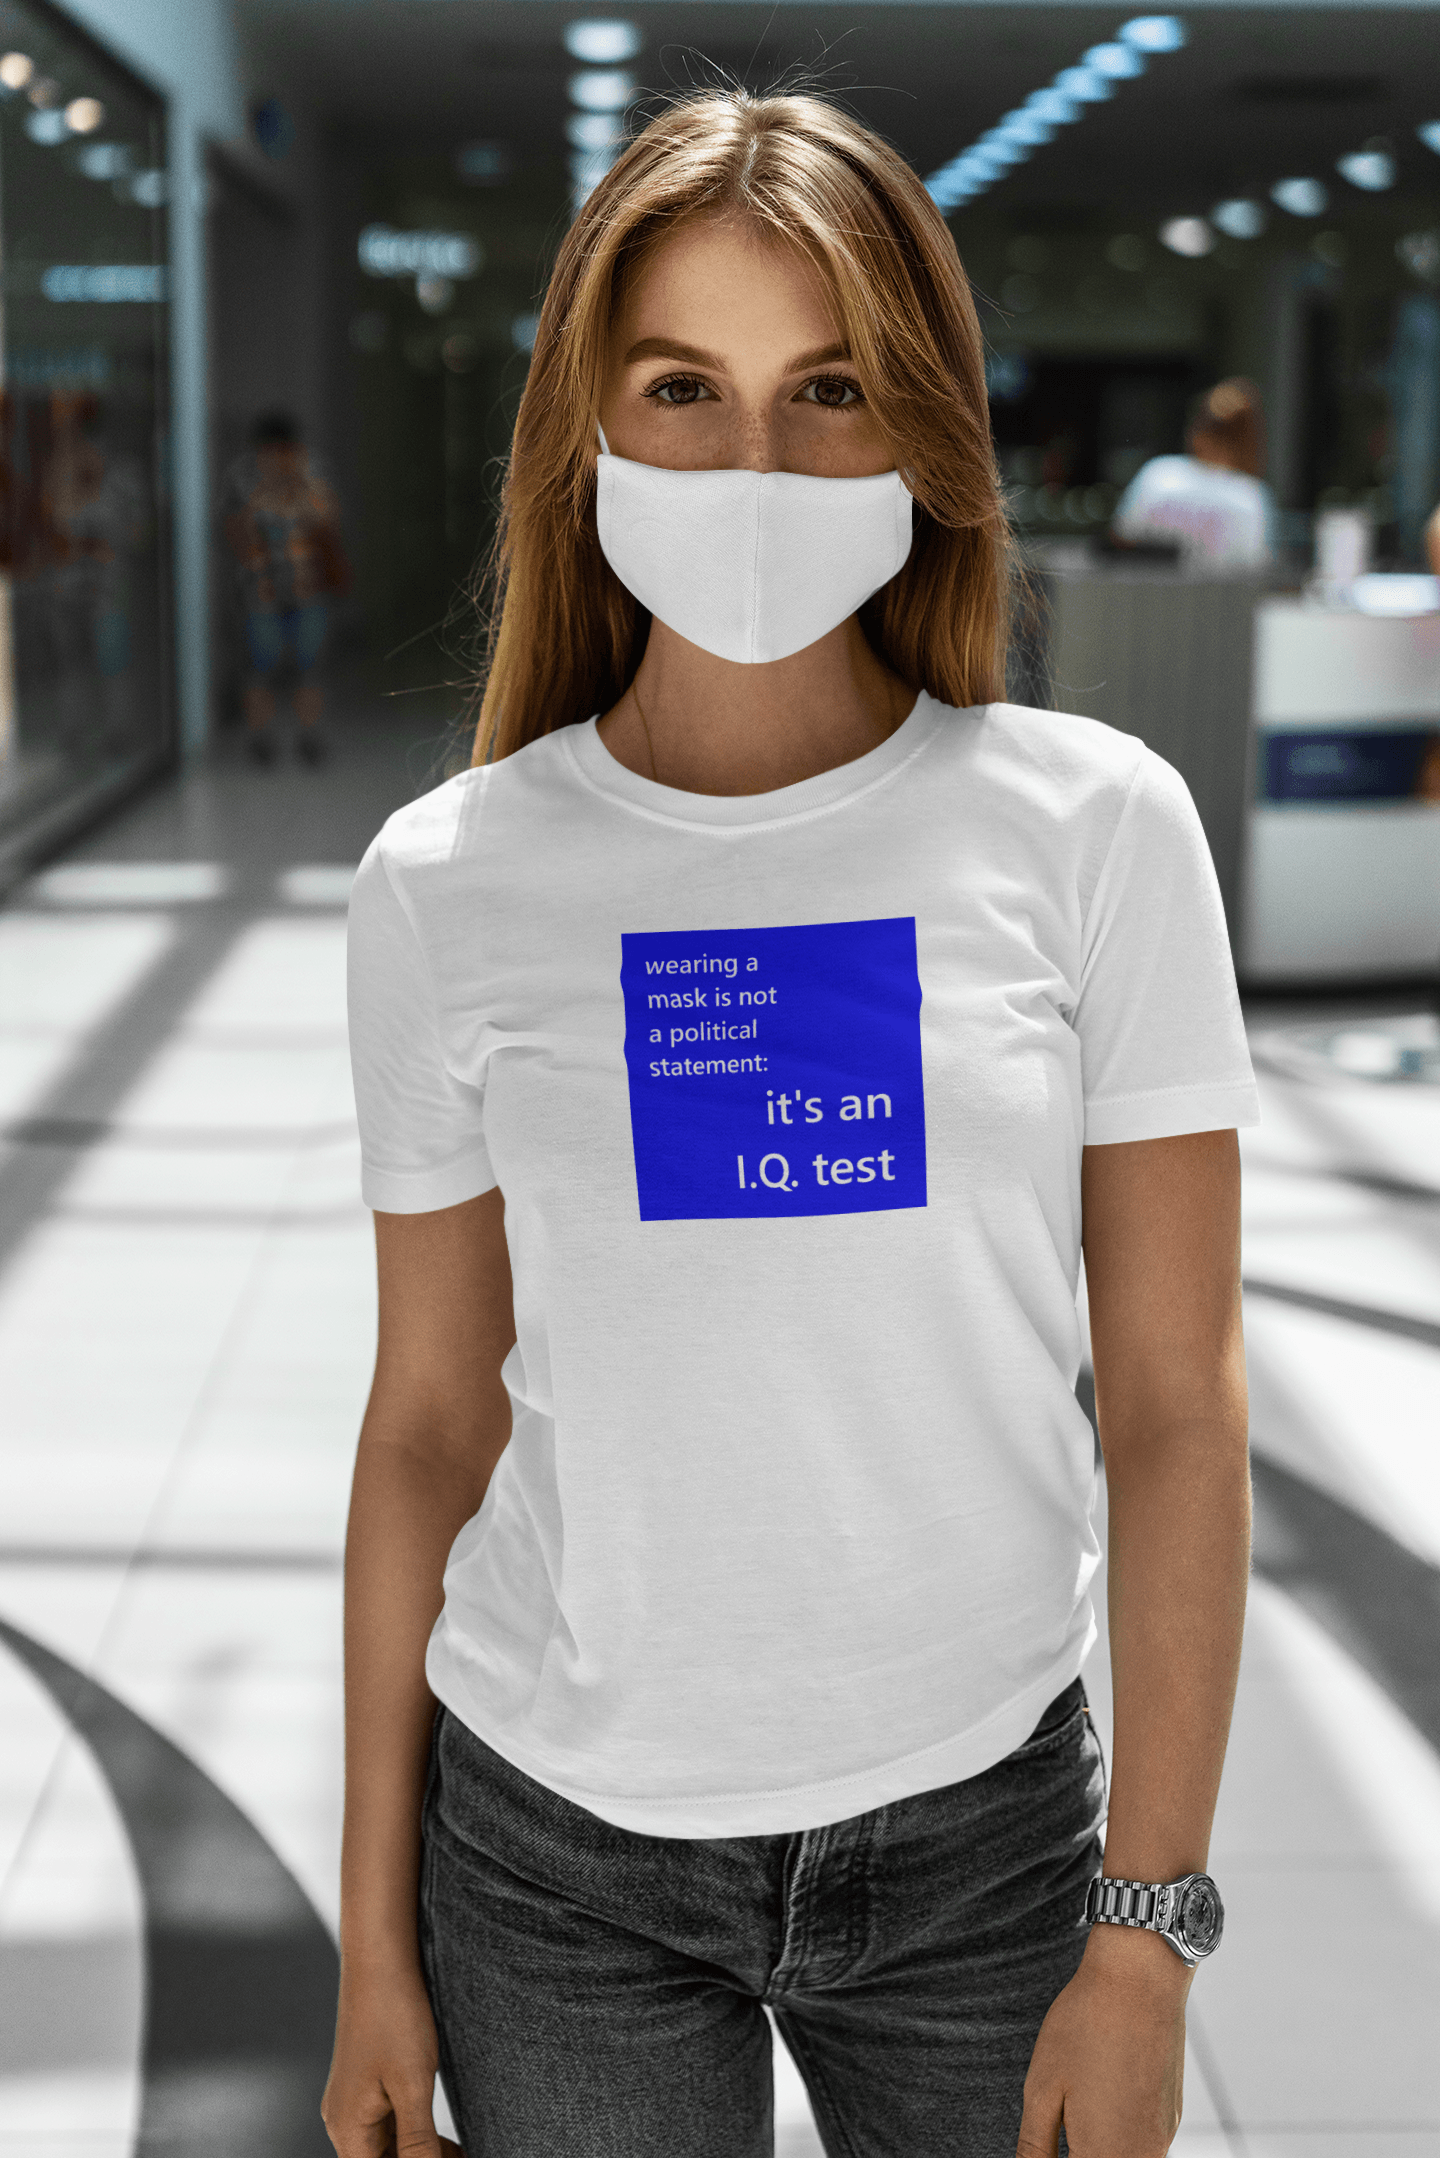 woman wearing a face mask and a slogan t-shirt